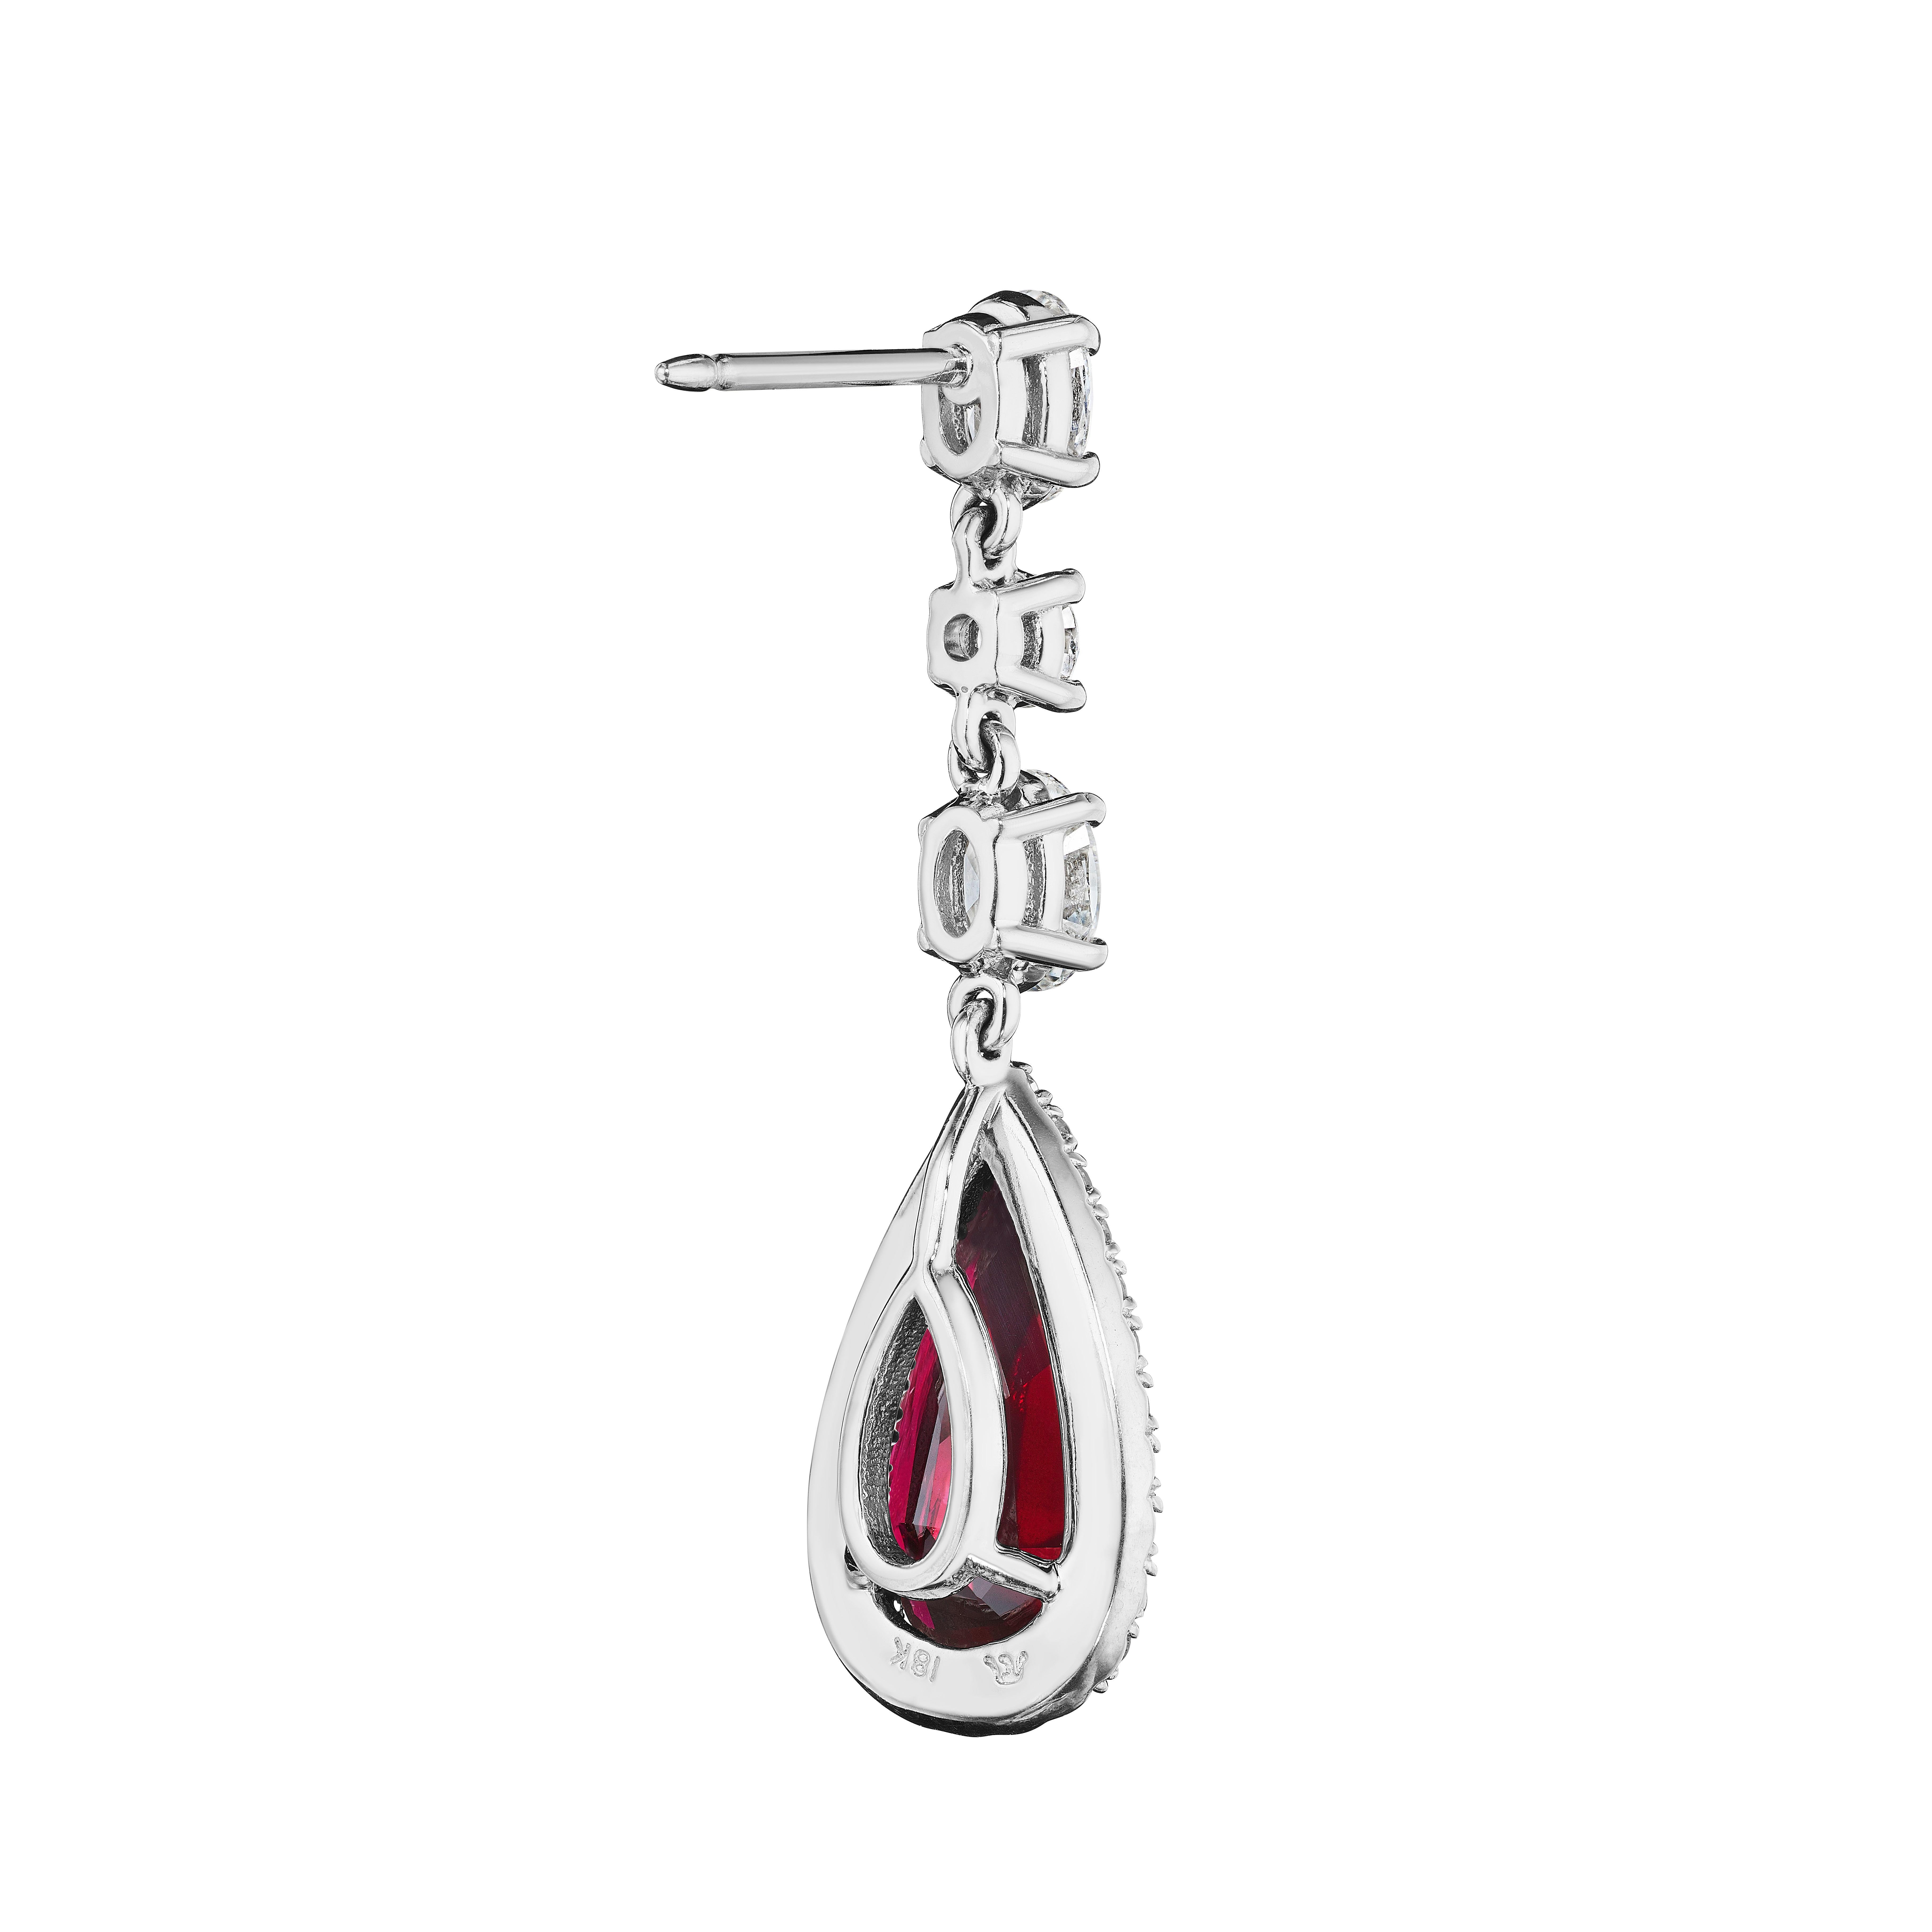 Modern 7.44ct Natural Mozambique Certified Pear Shape Ruby & Diamond Earrings in 18KT For Sale